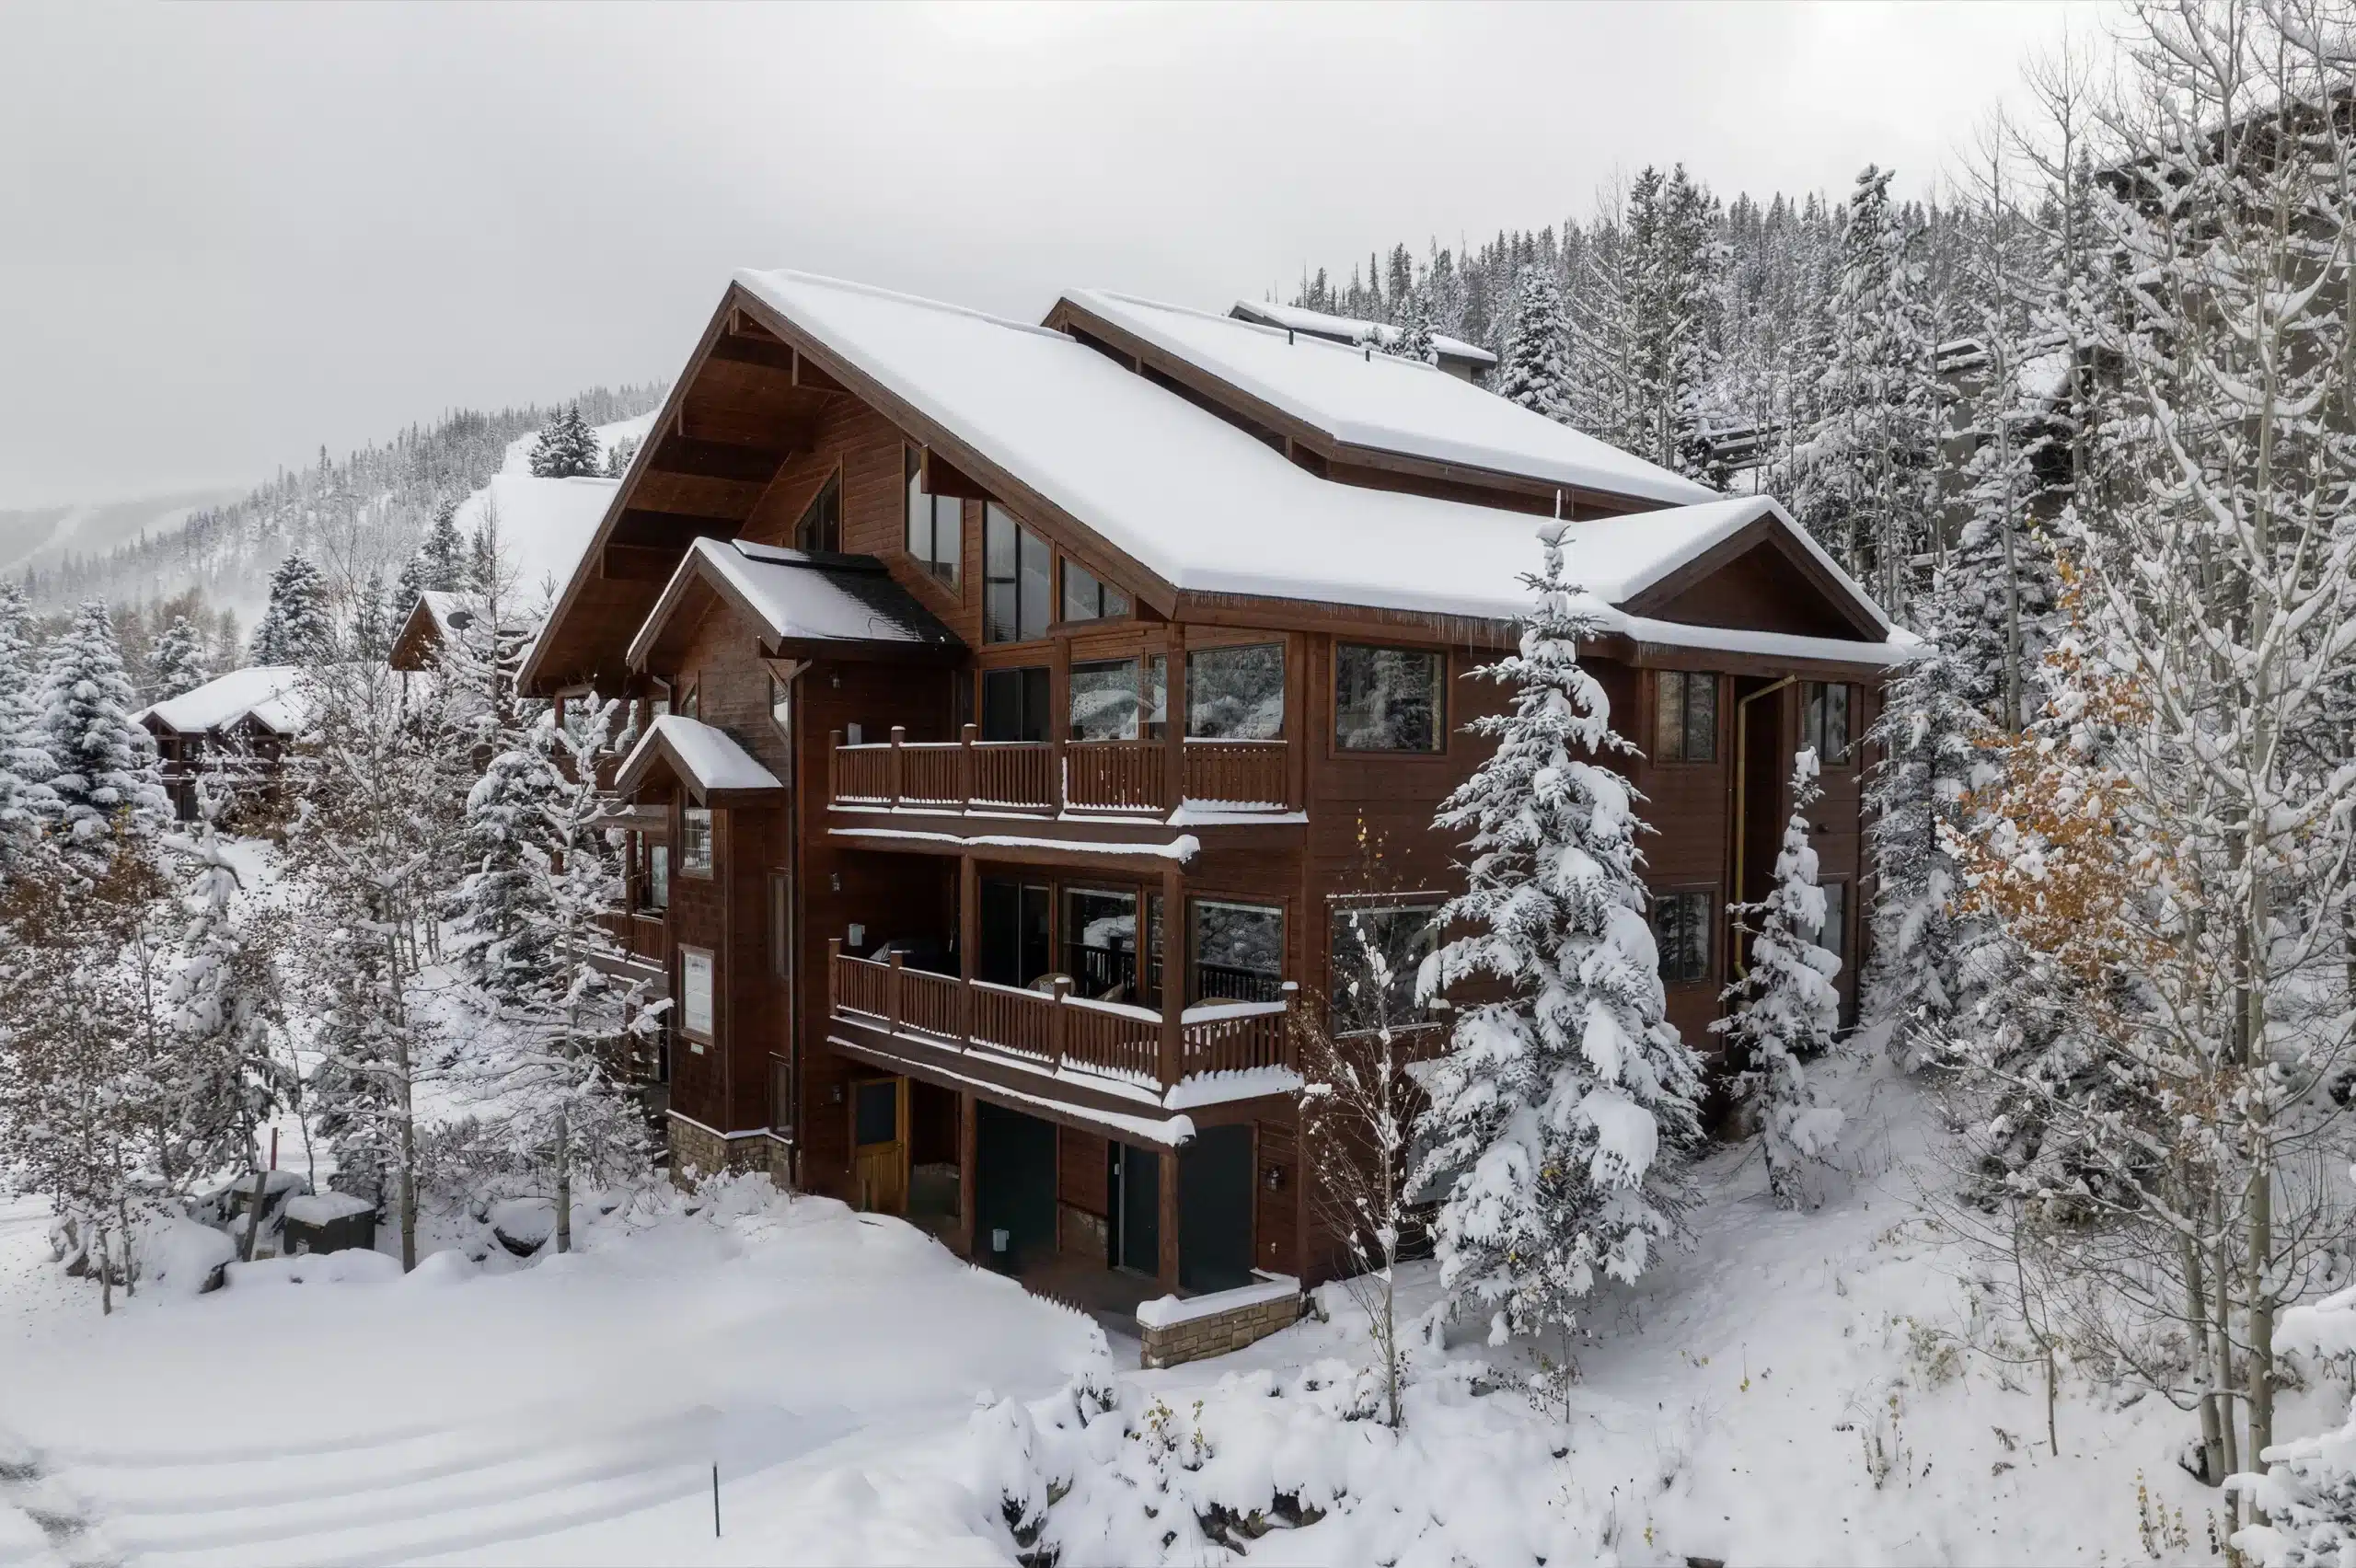 An affordable vacation rental cabin covered in snow with views of snow covered forest in the background